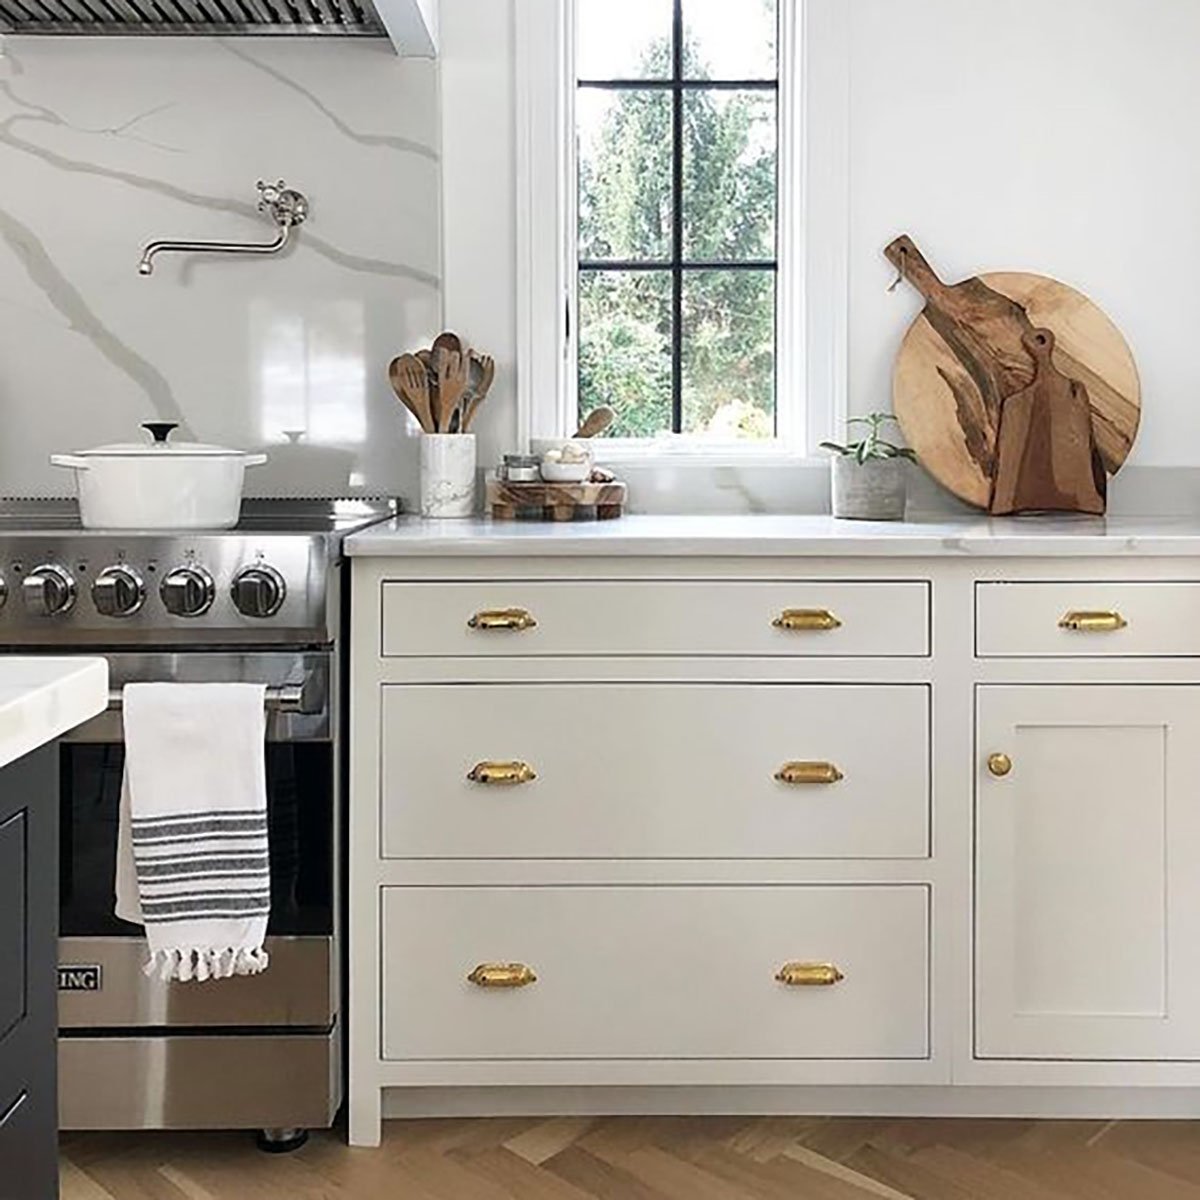 Benjamin Moore Classic Grey kitchen cabinets with gold hardware. Black trim windows paired with wood kitchen utensils and boards.